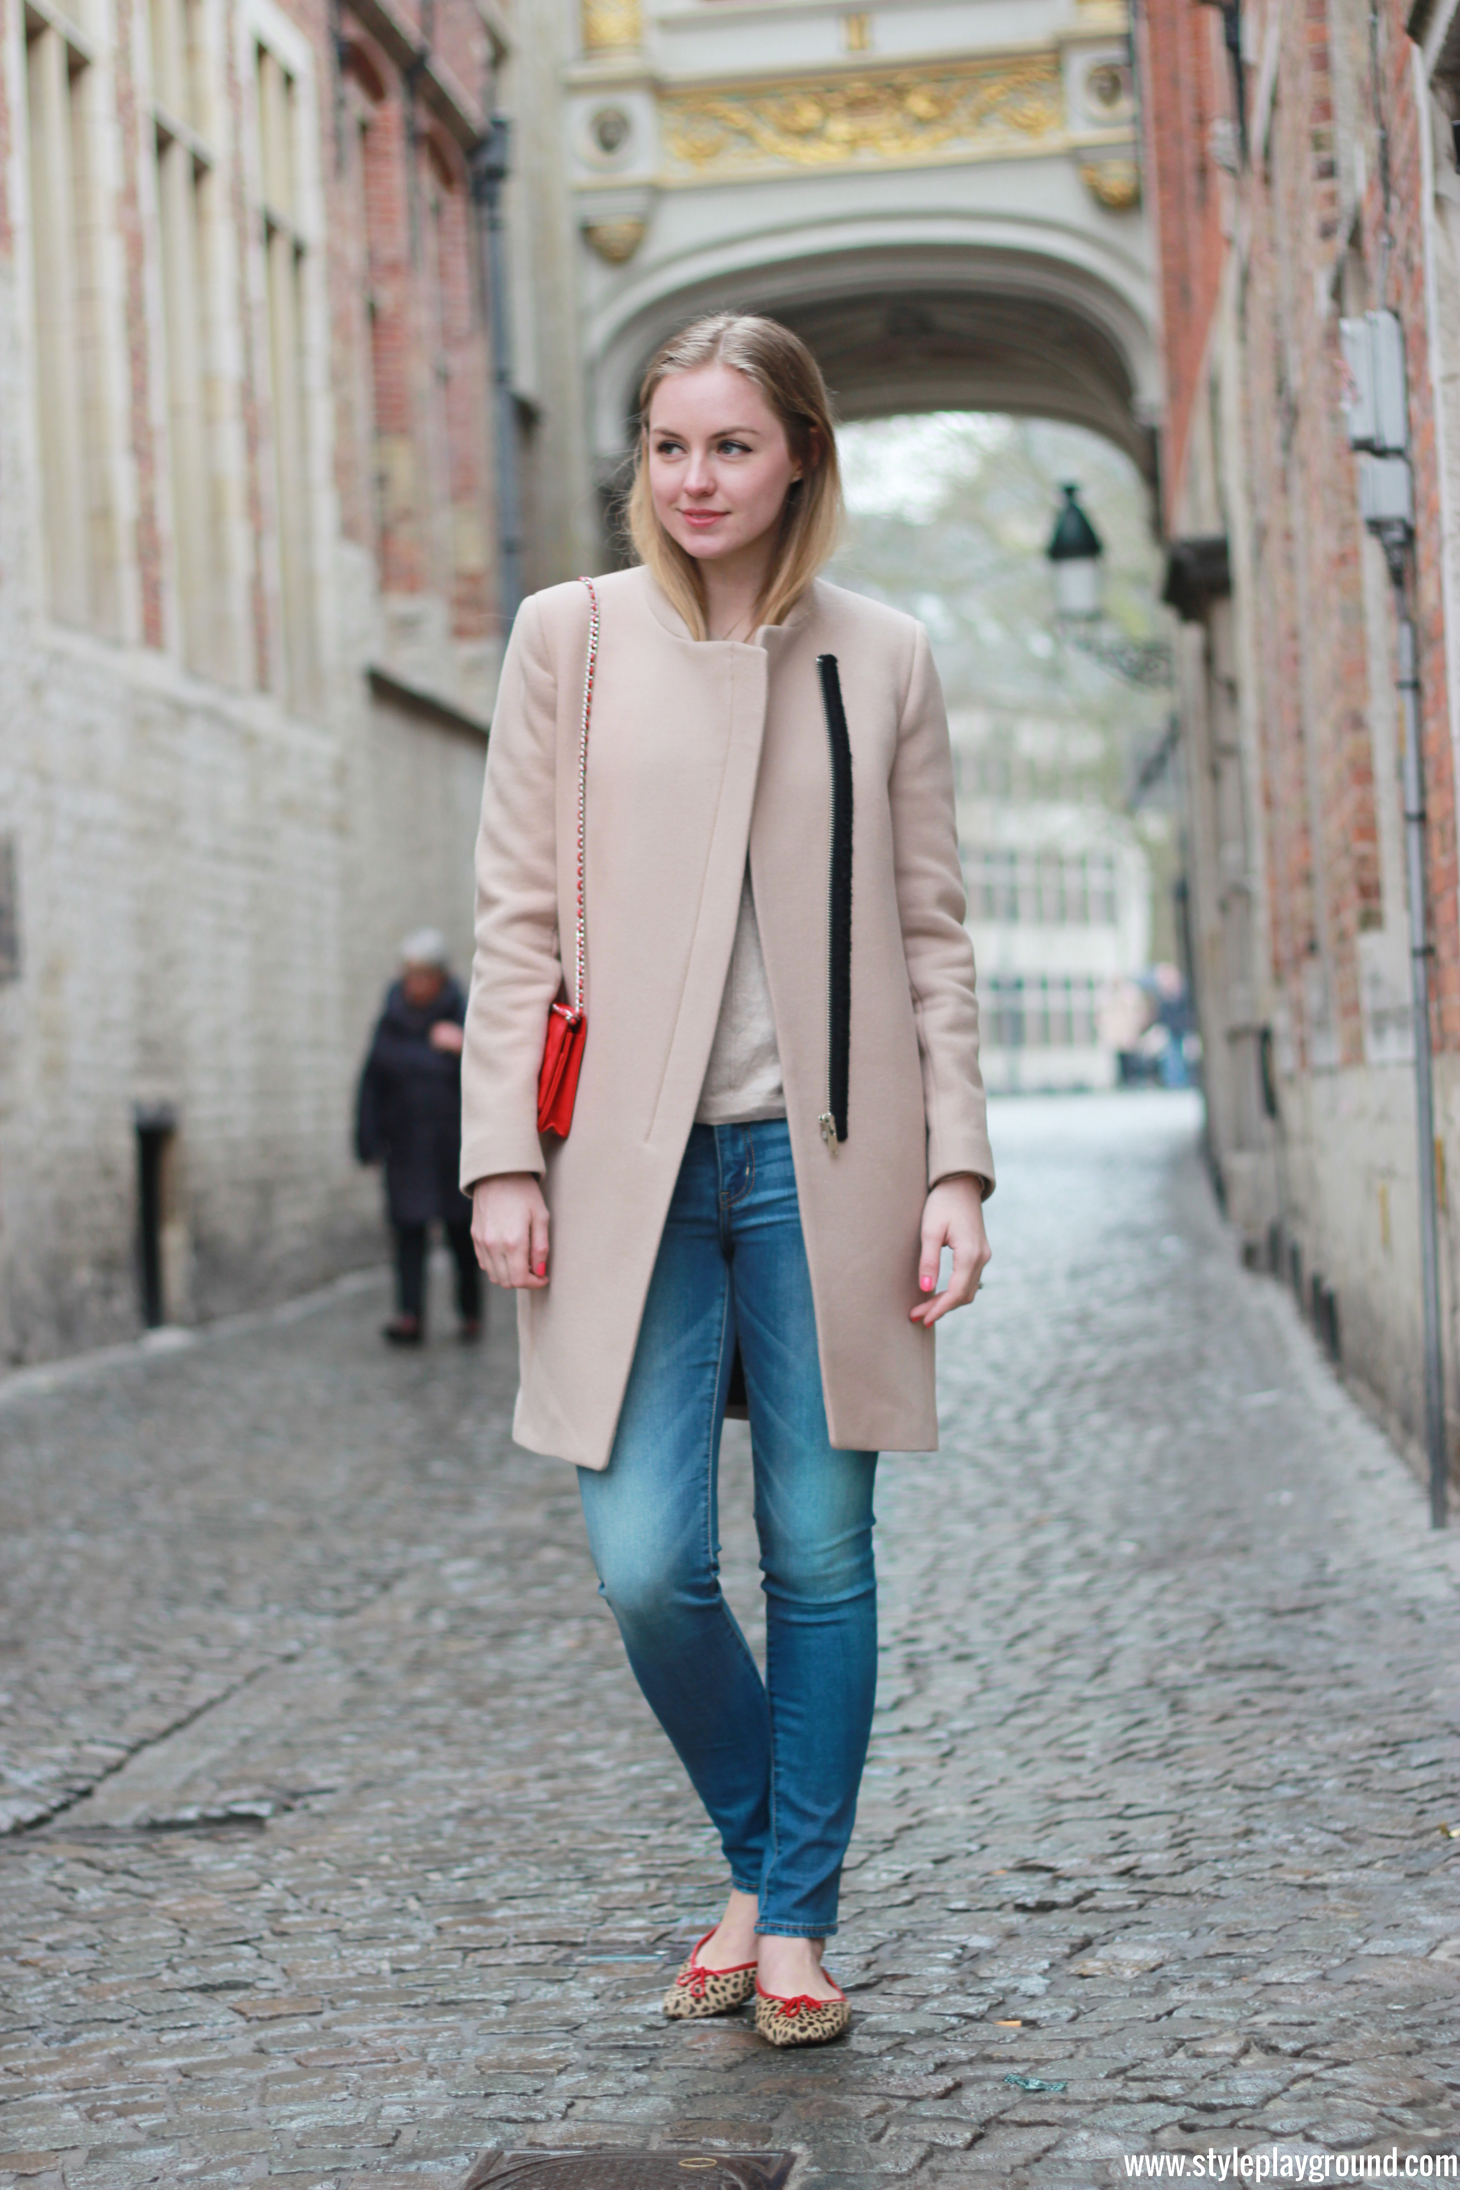 Axelle Blanpain of Style playground is wearing a Zara coat, American Eagle jeggings, French sole flats and Chanel WOC